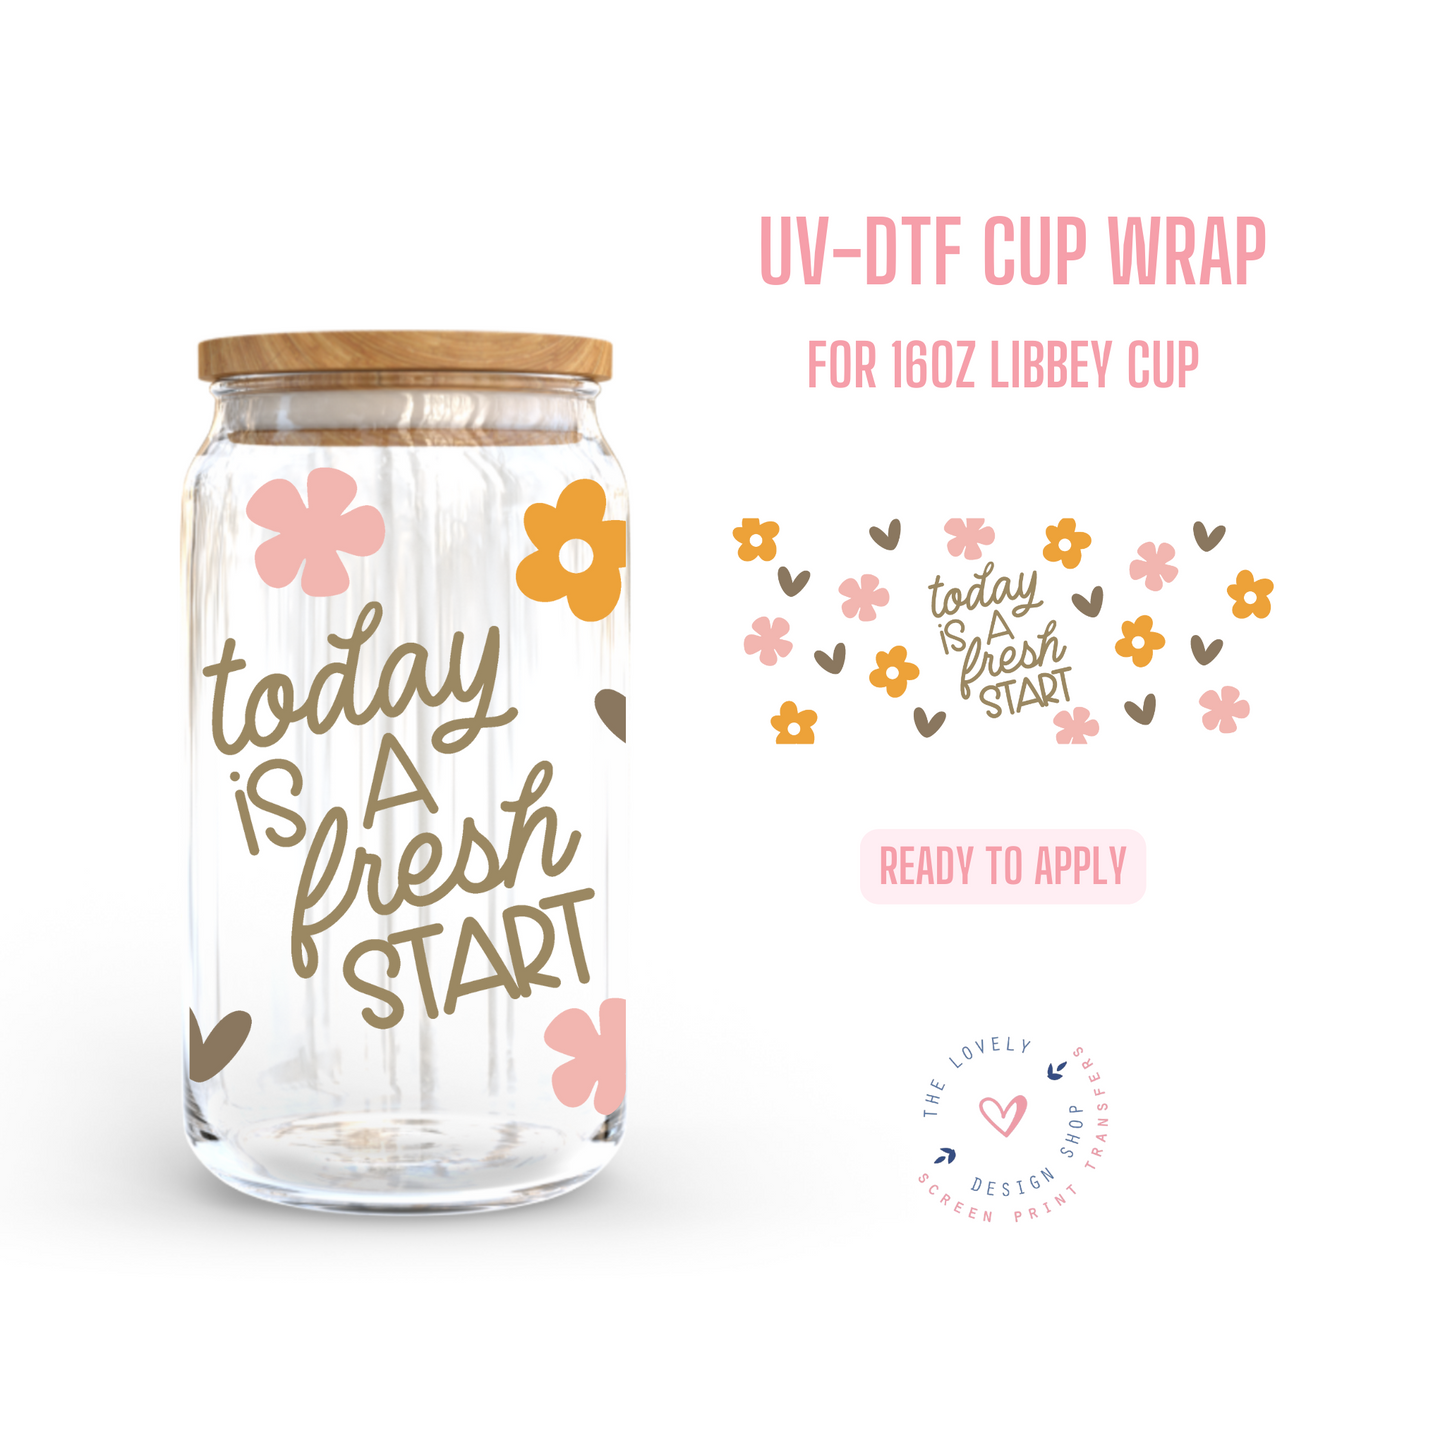 Today is a Fresh Start - UV DTF 16 oz Libbey Cup Wrap (Ready to Ship)